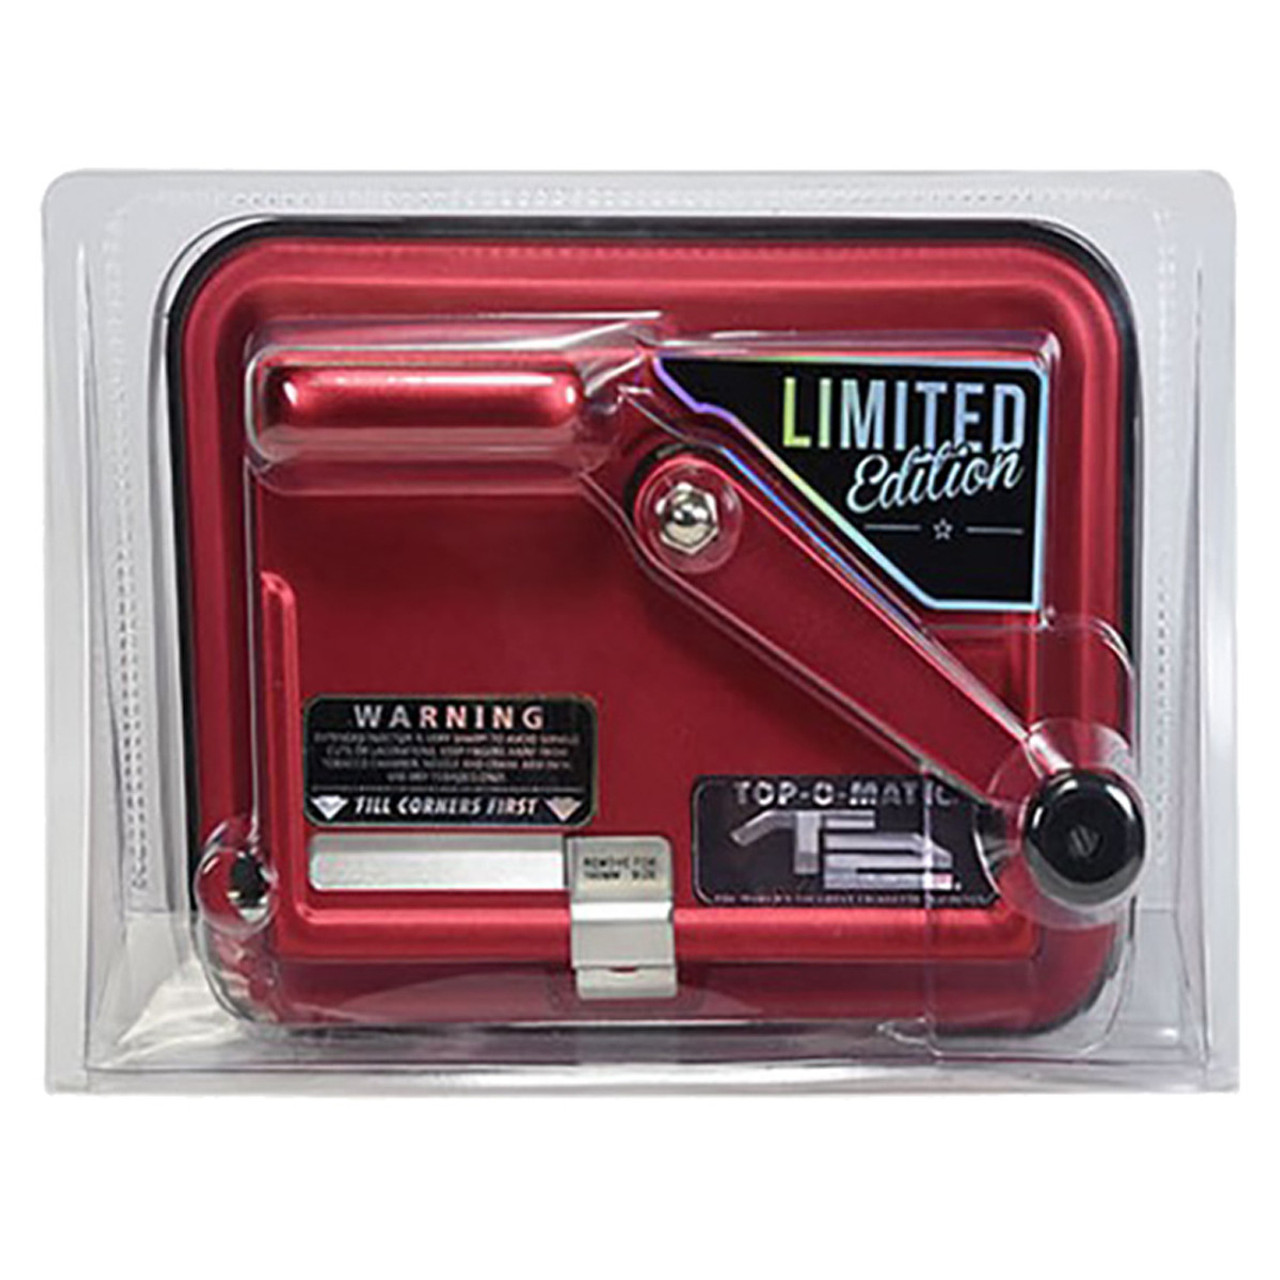 Top-O-Matic T2 Cigarette Rolling Injector Machine Limited Edition Red